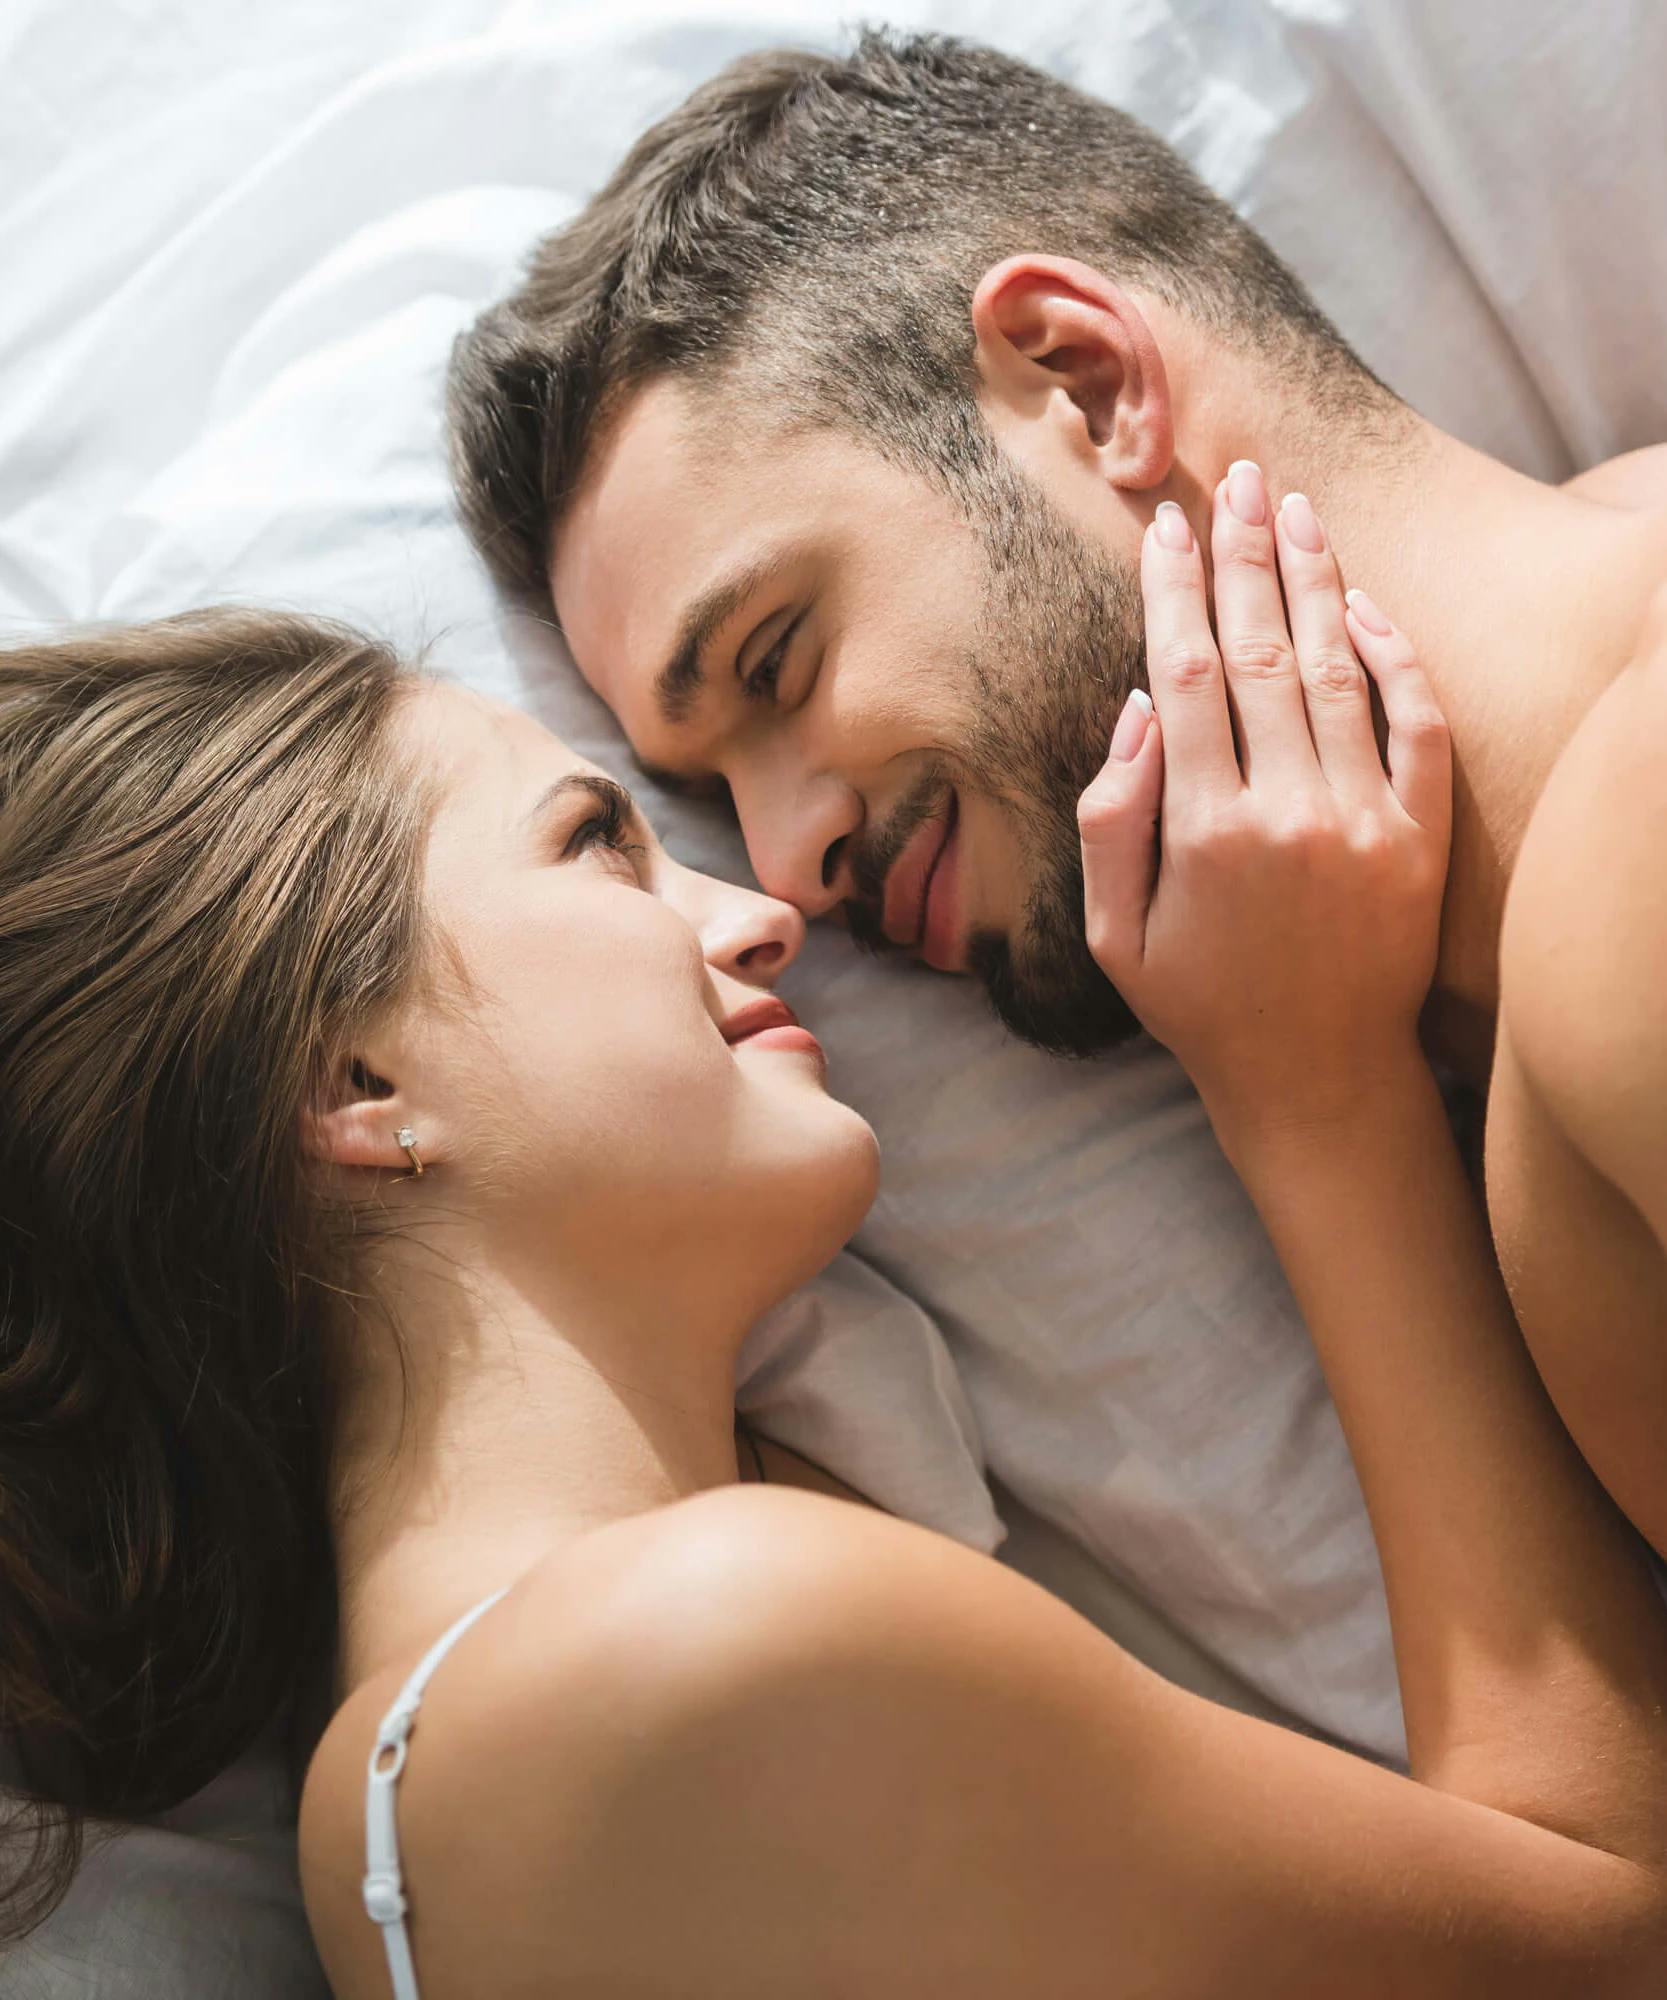 shutterstock How To Talk About Sex With Your Husband